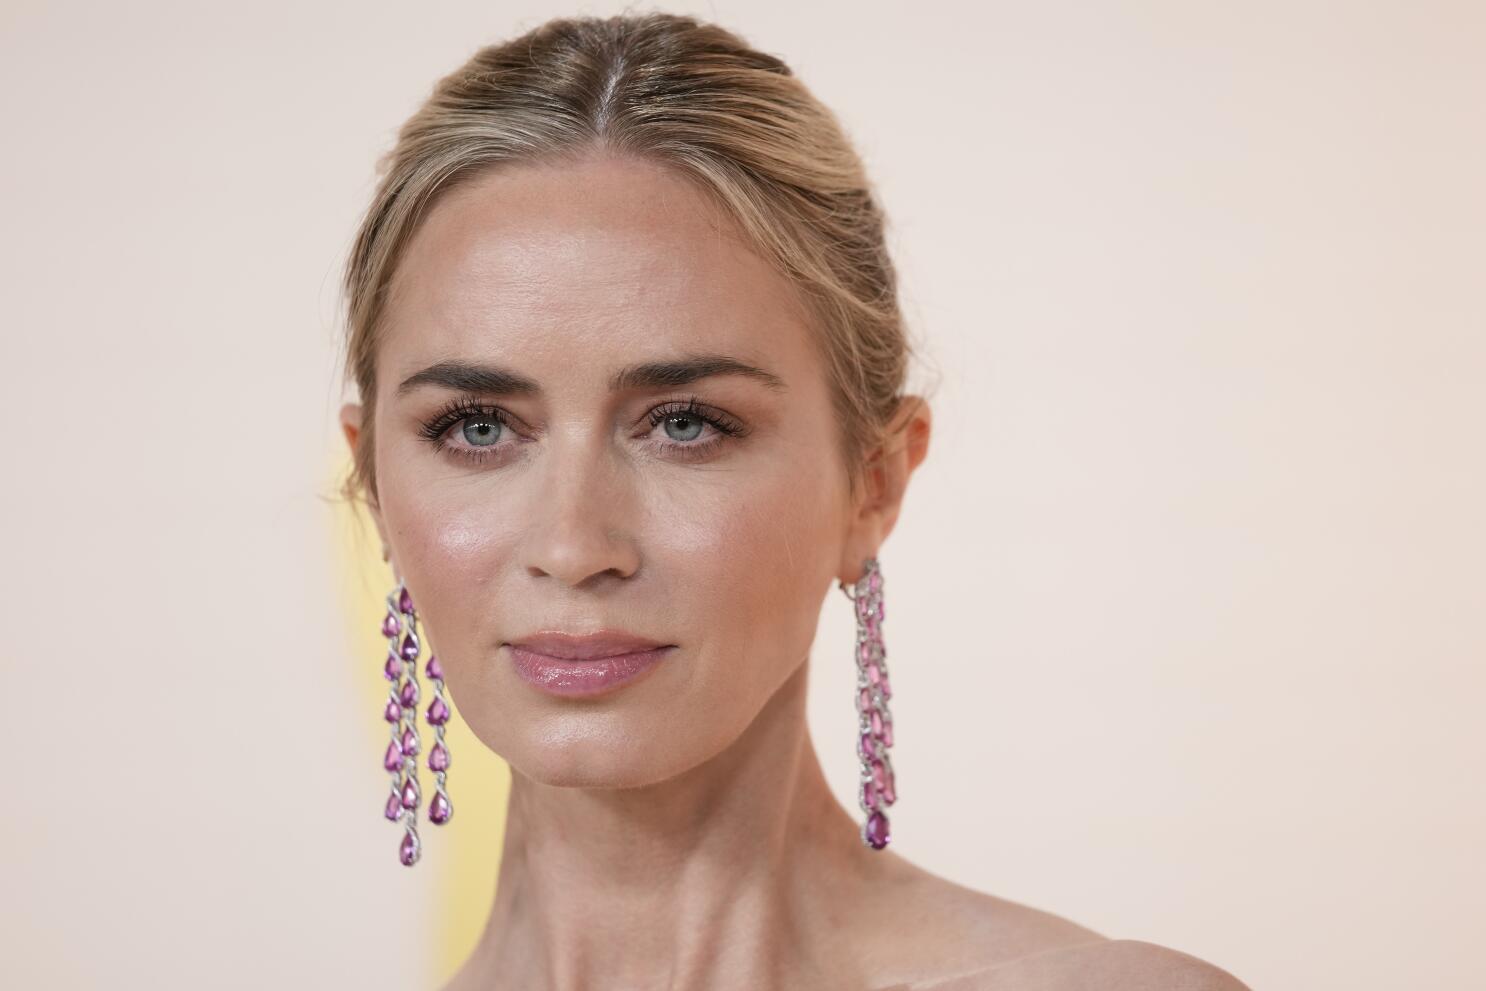 Emily Blunt explains why she's taking a break from acting - Los